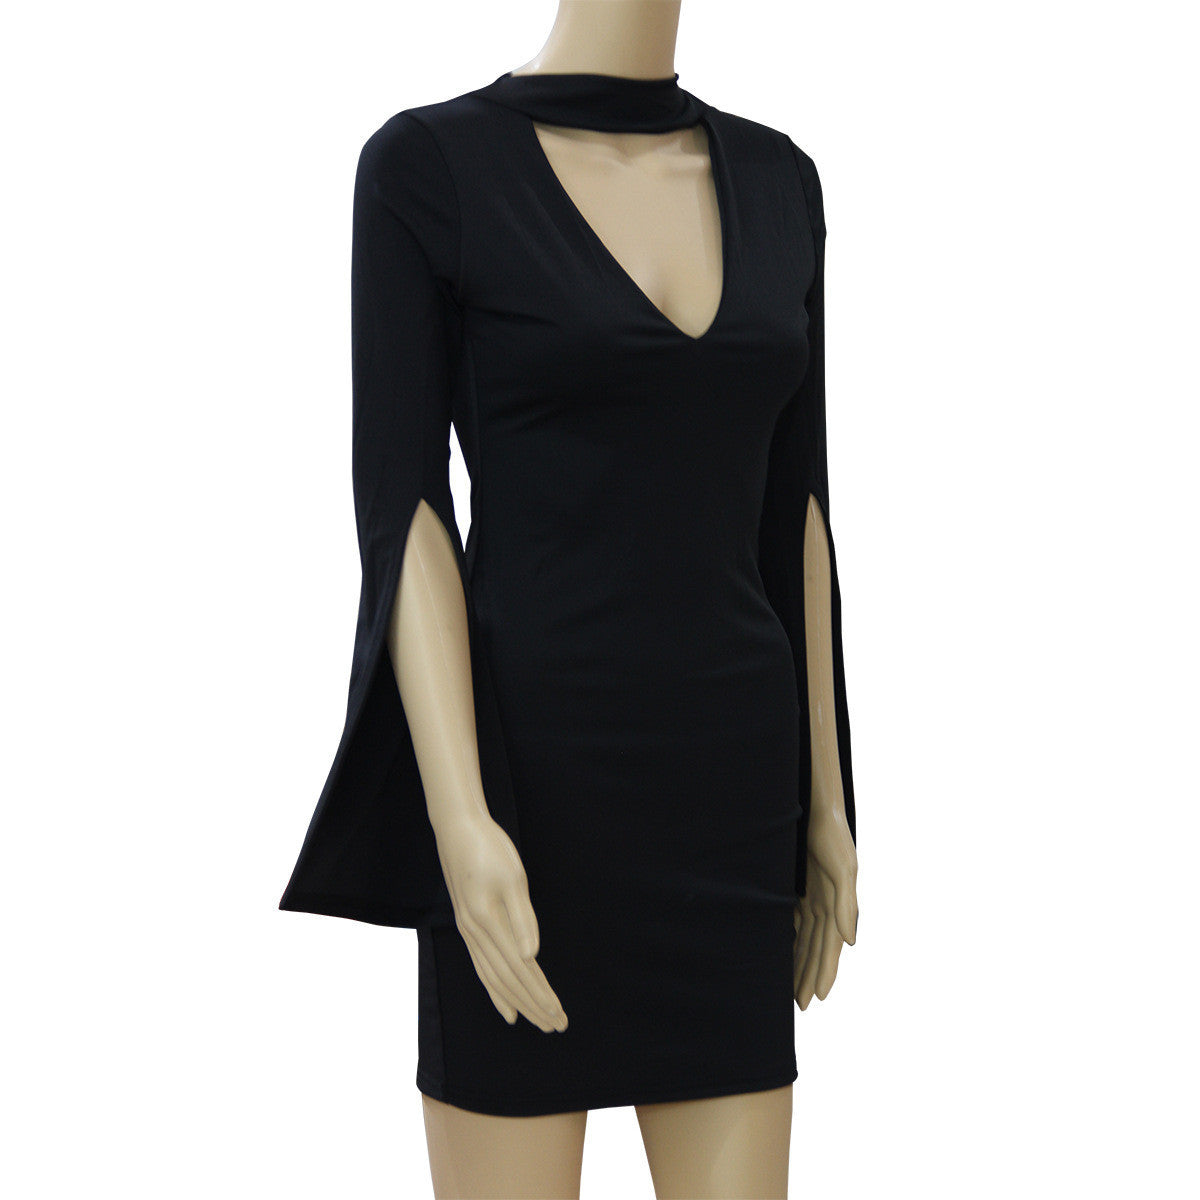 Sexy Black Horn Split Sleeve Bodycon Short Dress - Oh Yours Fashion - 6